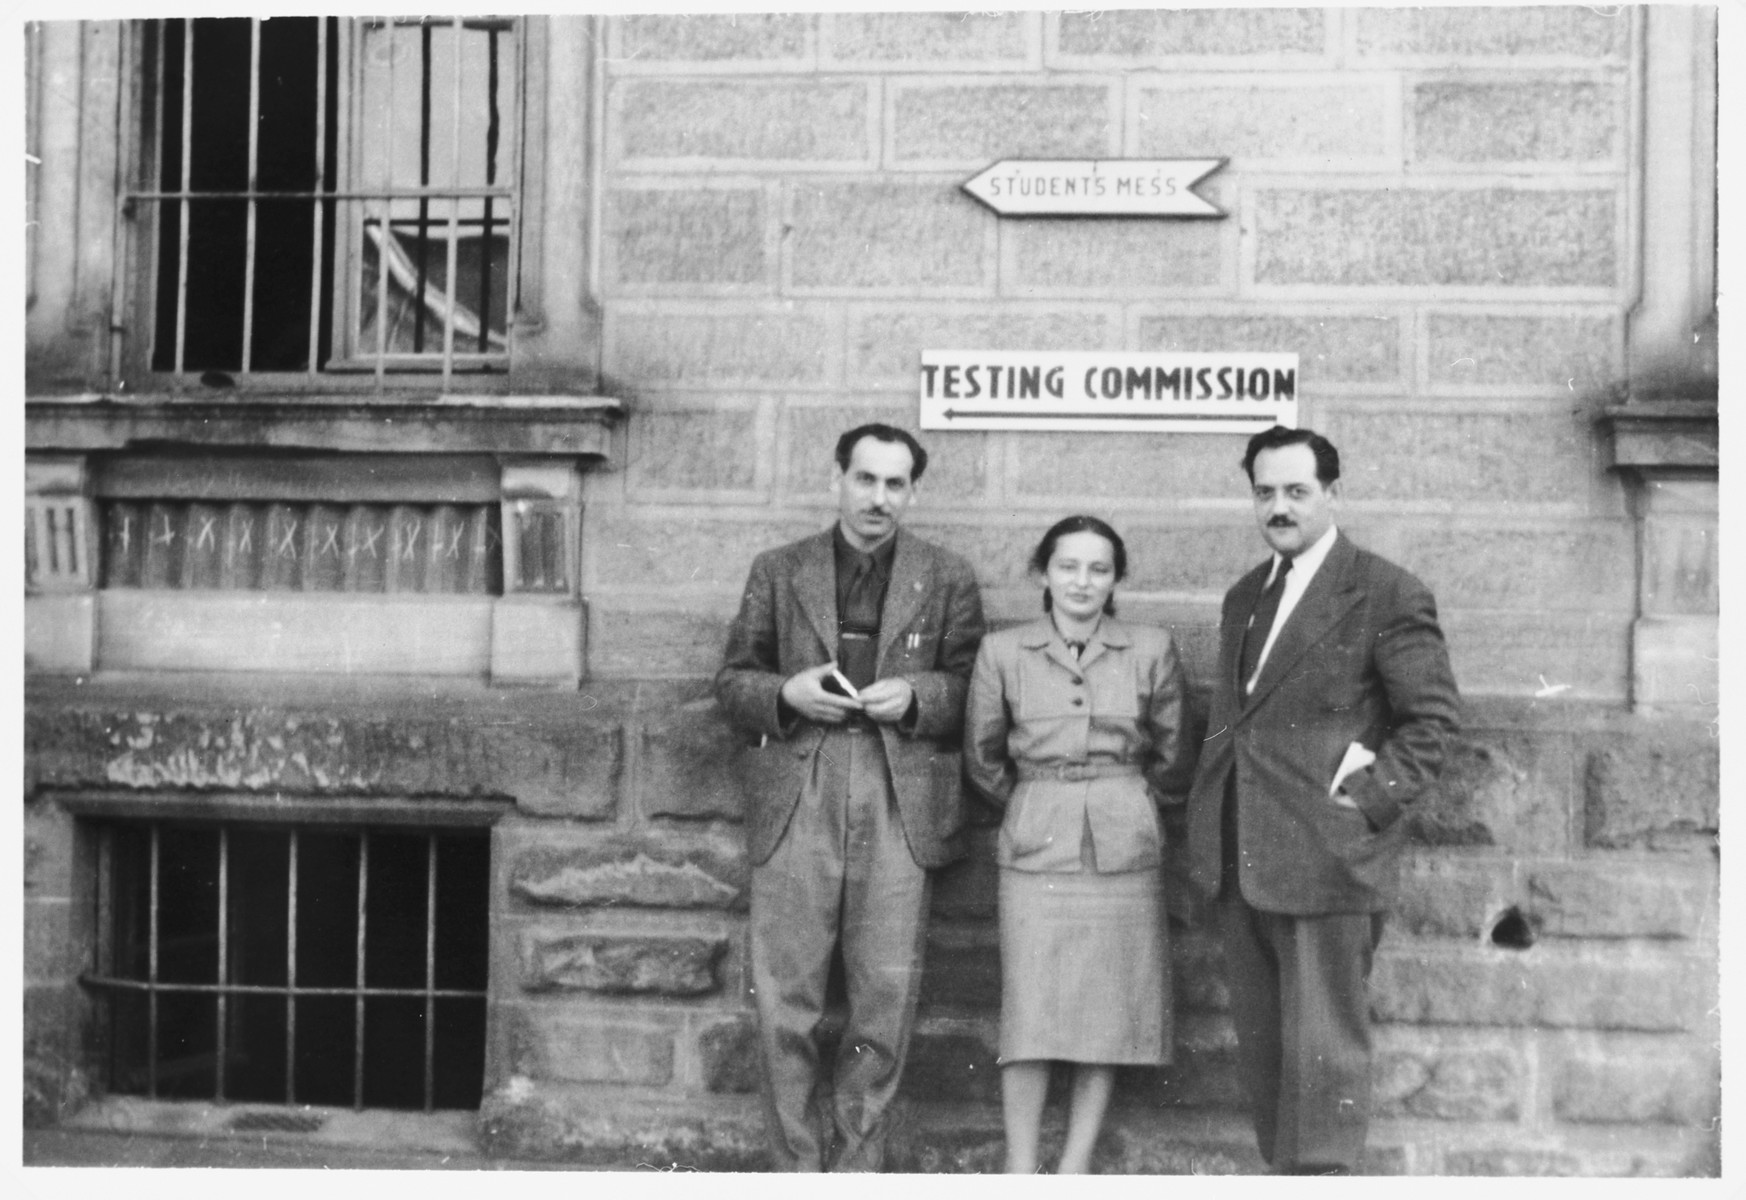 Canadian delegates stand outside the testing commission where prospective immigrants into Canada will be trade tested.

From left to right are David Siegel, the liaison between Canadian immigration and the Canadian Jewish Congress, Bella Meiskin of the Jewish Labor Committee and Lucien St. Cyr from the Canadian Labor Department.